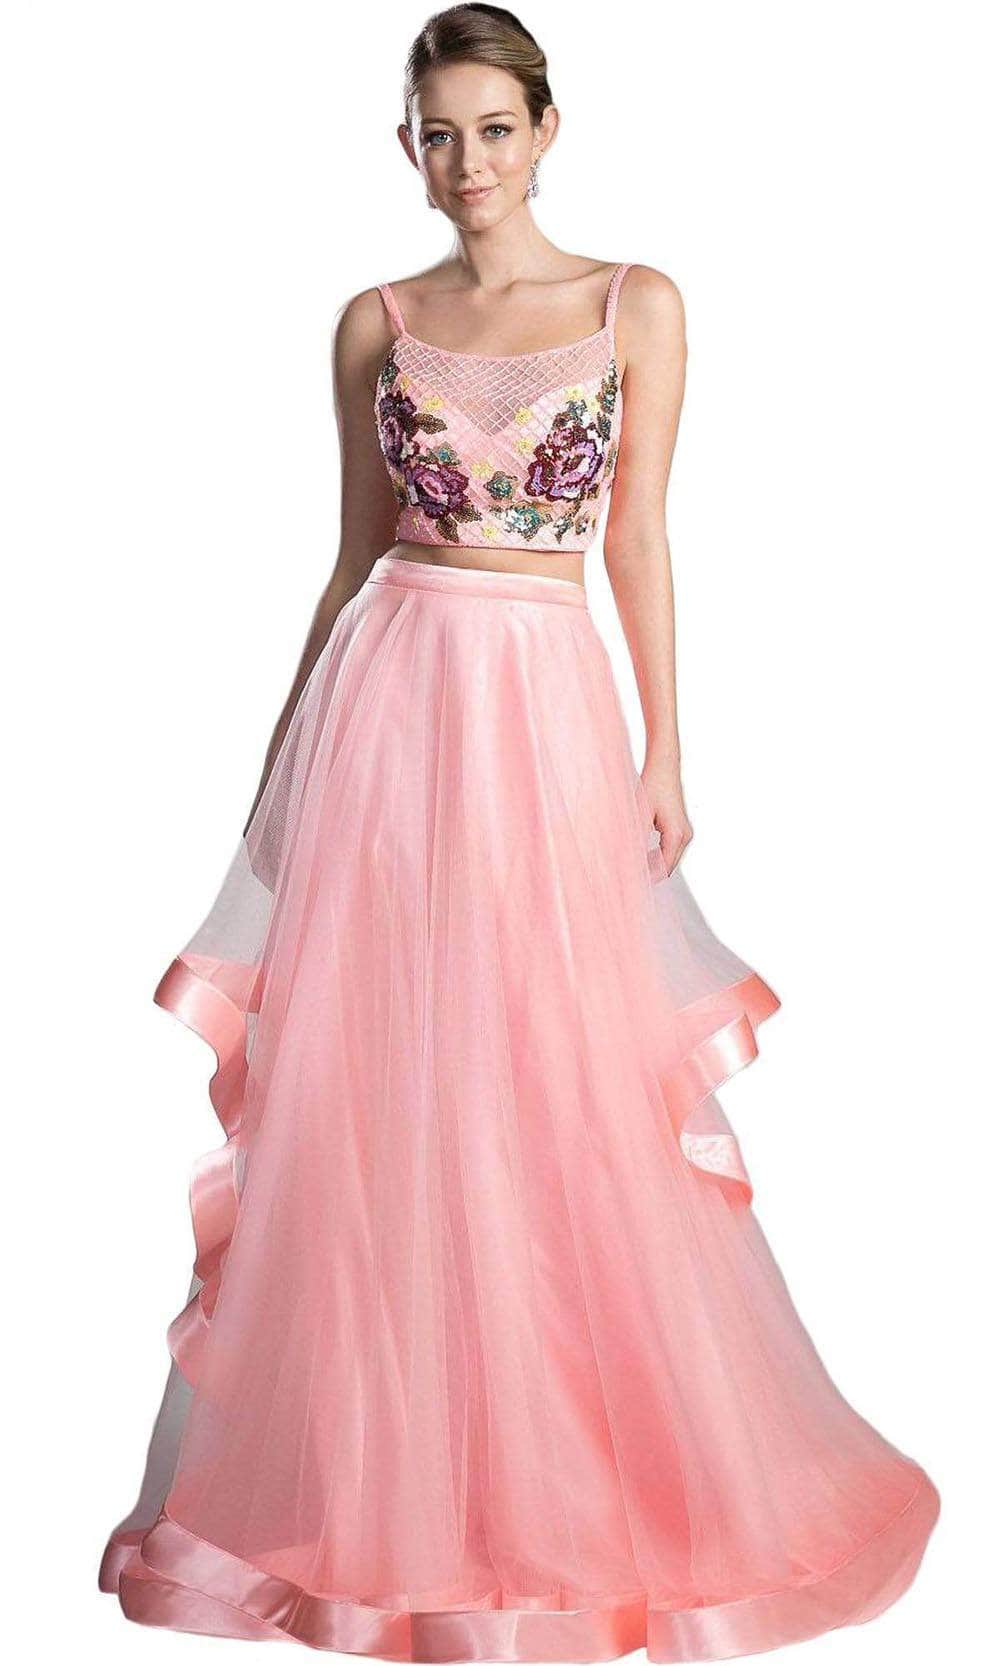 Image of Ladivine 11793 - Beaded Two Piece Tulle Evening Dress